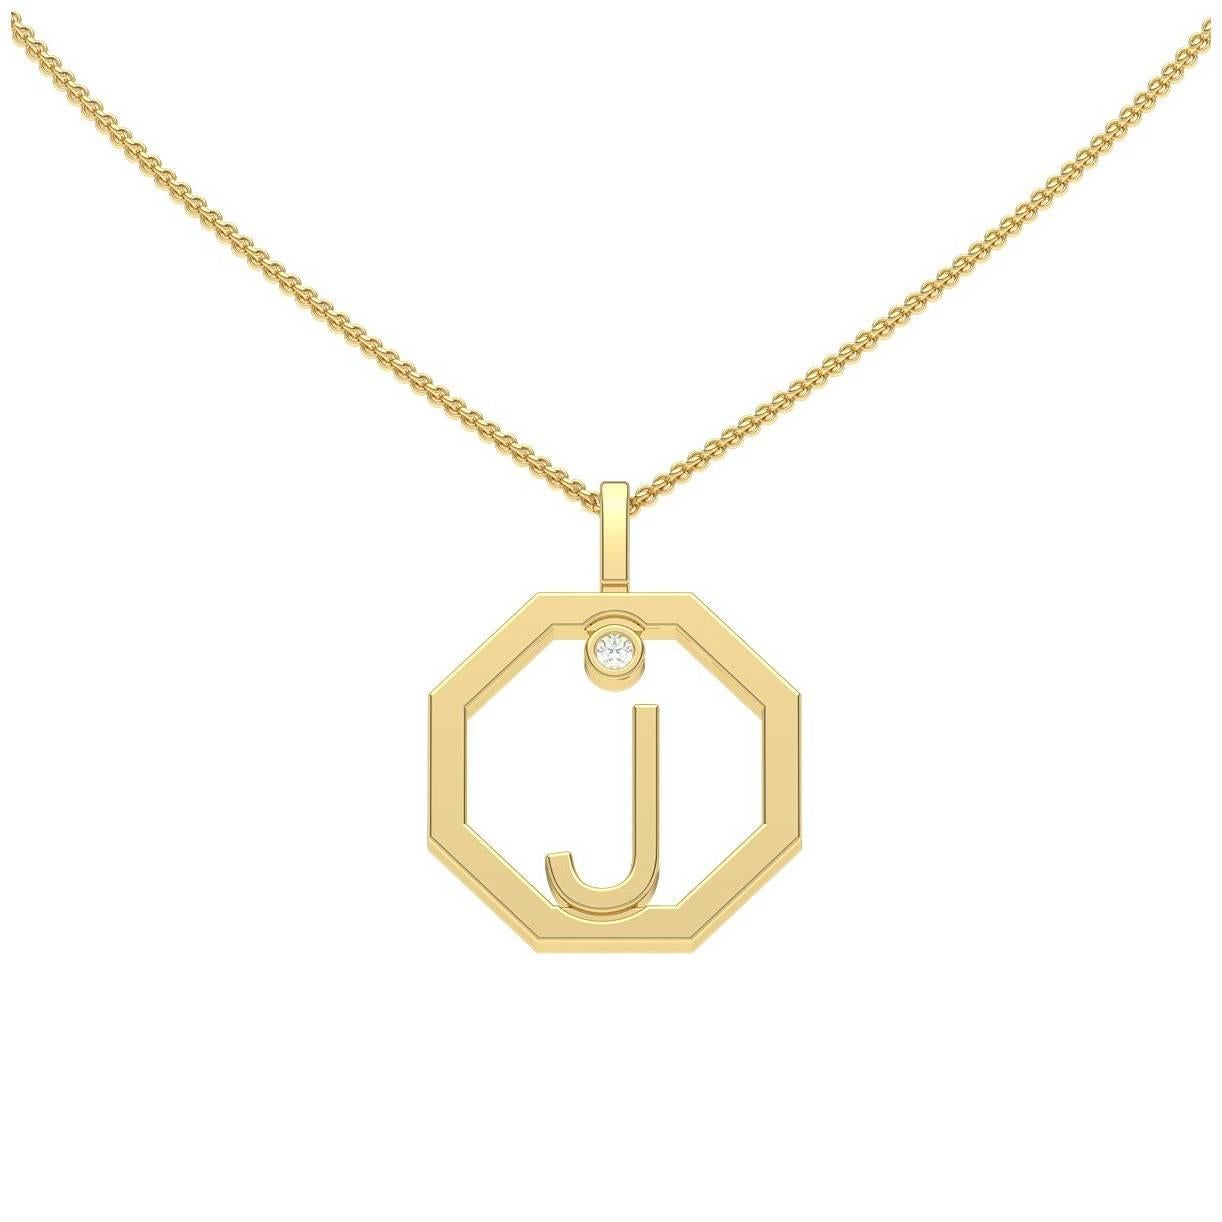 Our diamond initial pendant makes the perfect personalised gift. Handcrafted to order in our Sydney studios in 18 karat white gold and set with a sparkling diamond, this timeless octagonal pendant is sure to delight. Chains sold separately, please